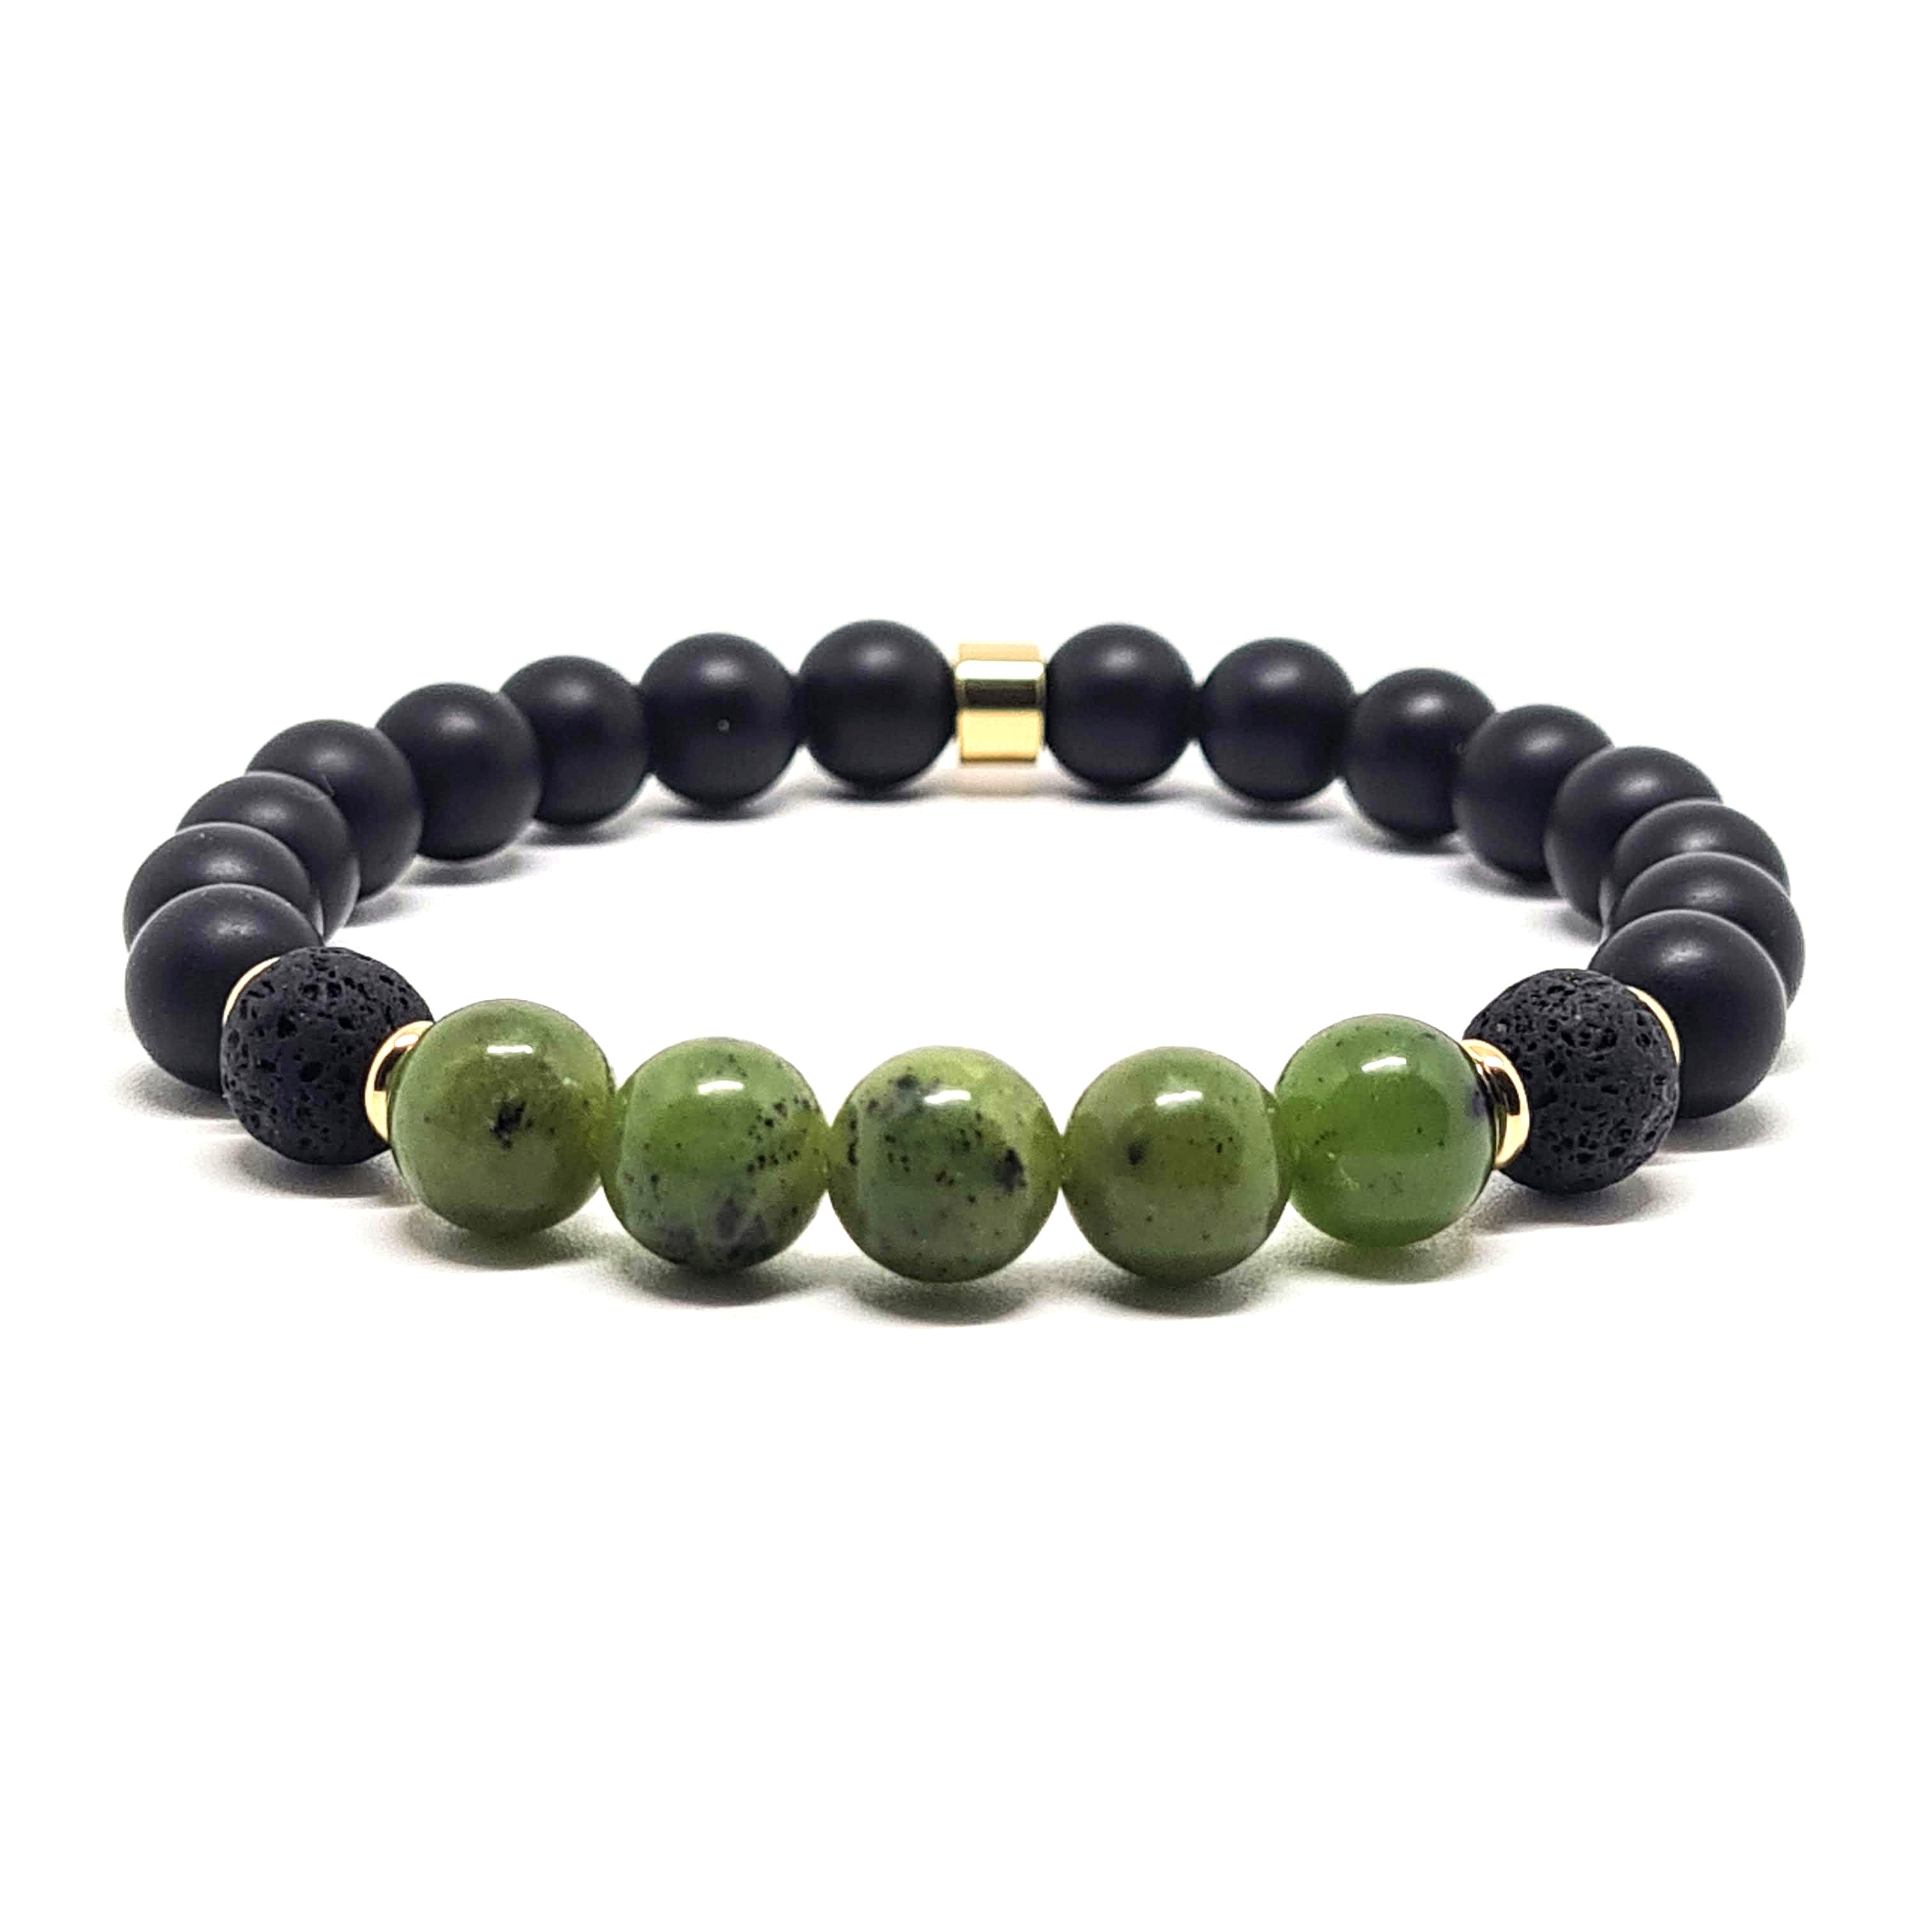 A Matt Onyx Jade and Lave stone Bracelet with 18ct gold plated accessories